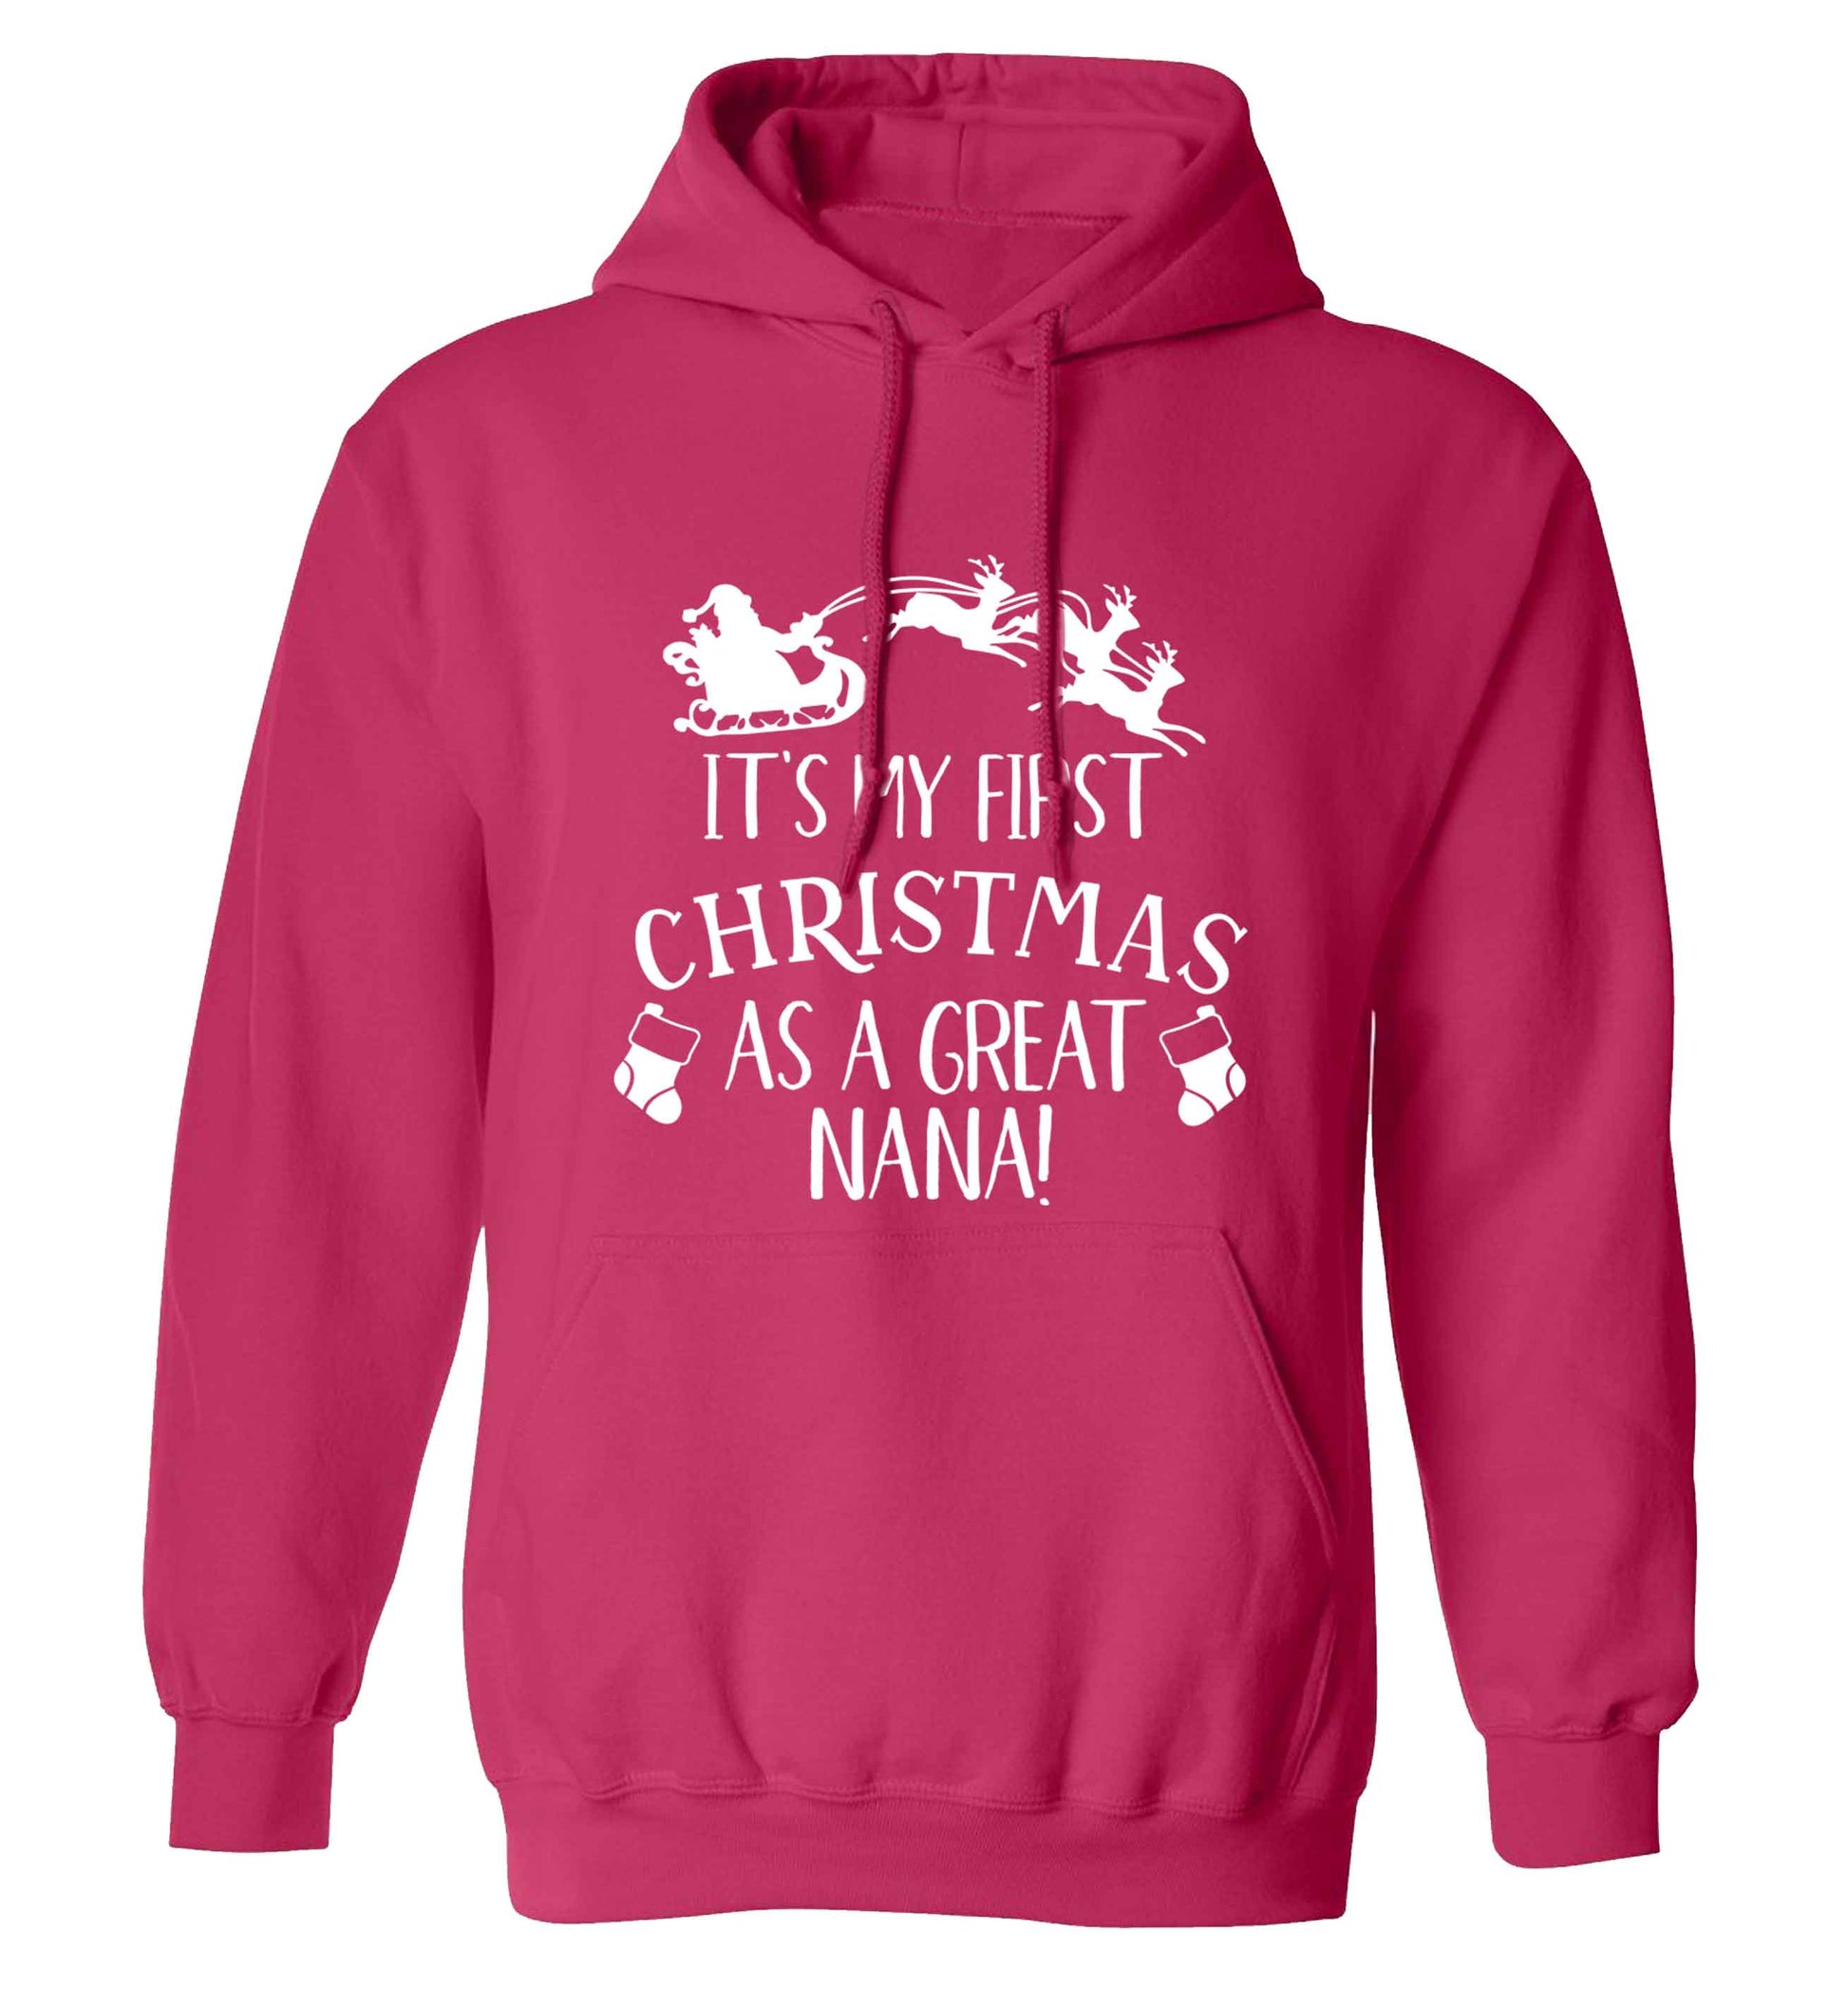 It's my first Christmas as a great nana! adults unisex pink hoodie 2XL